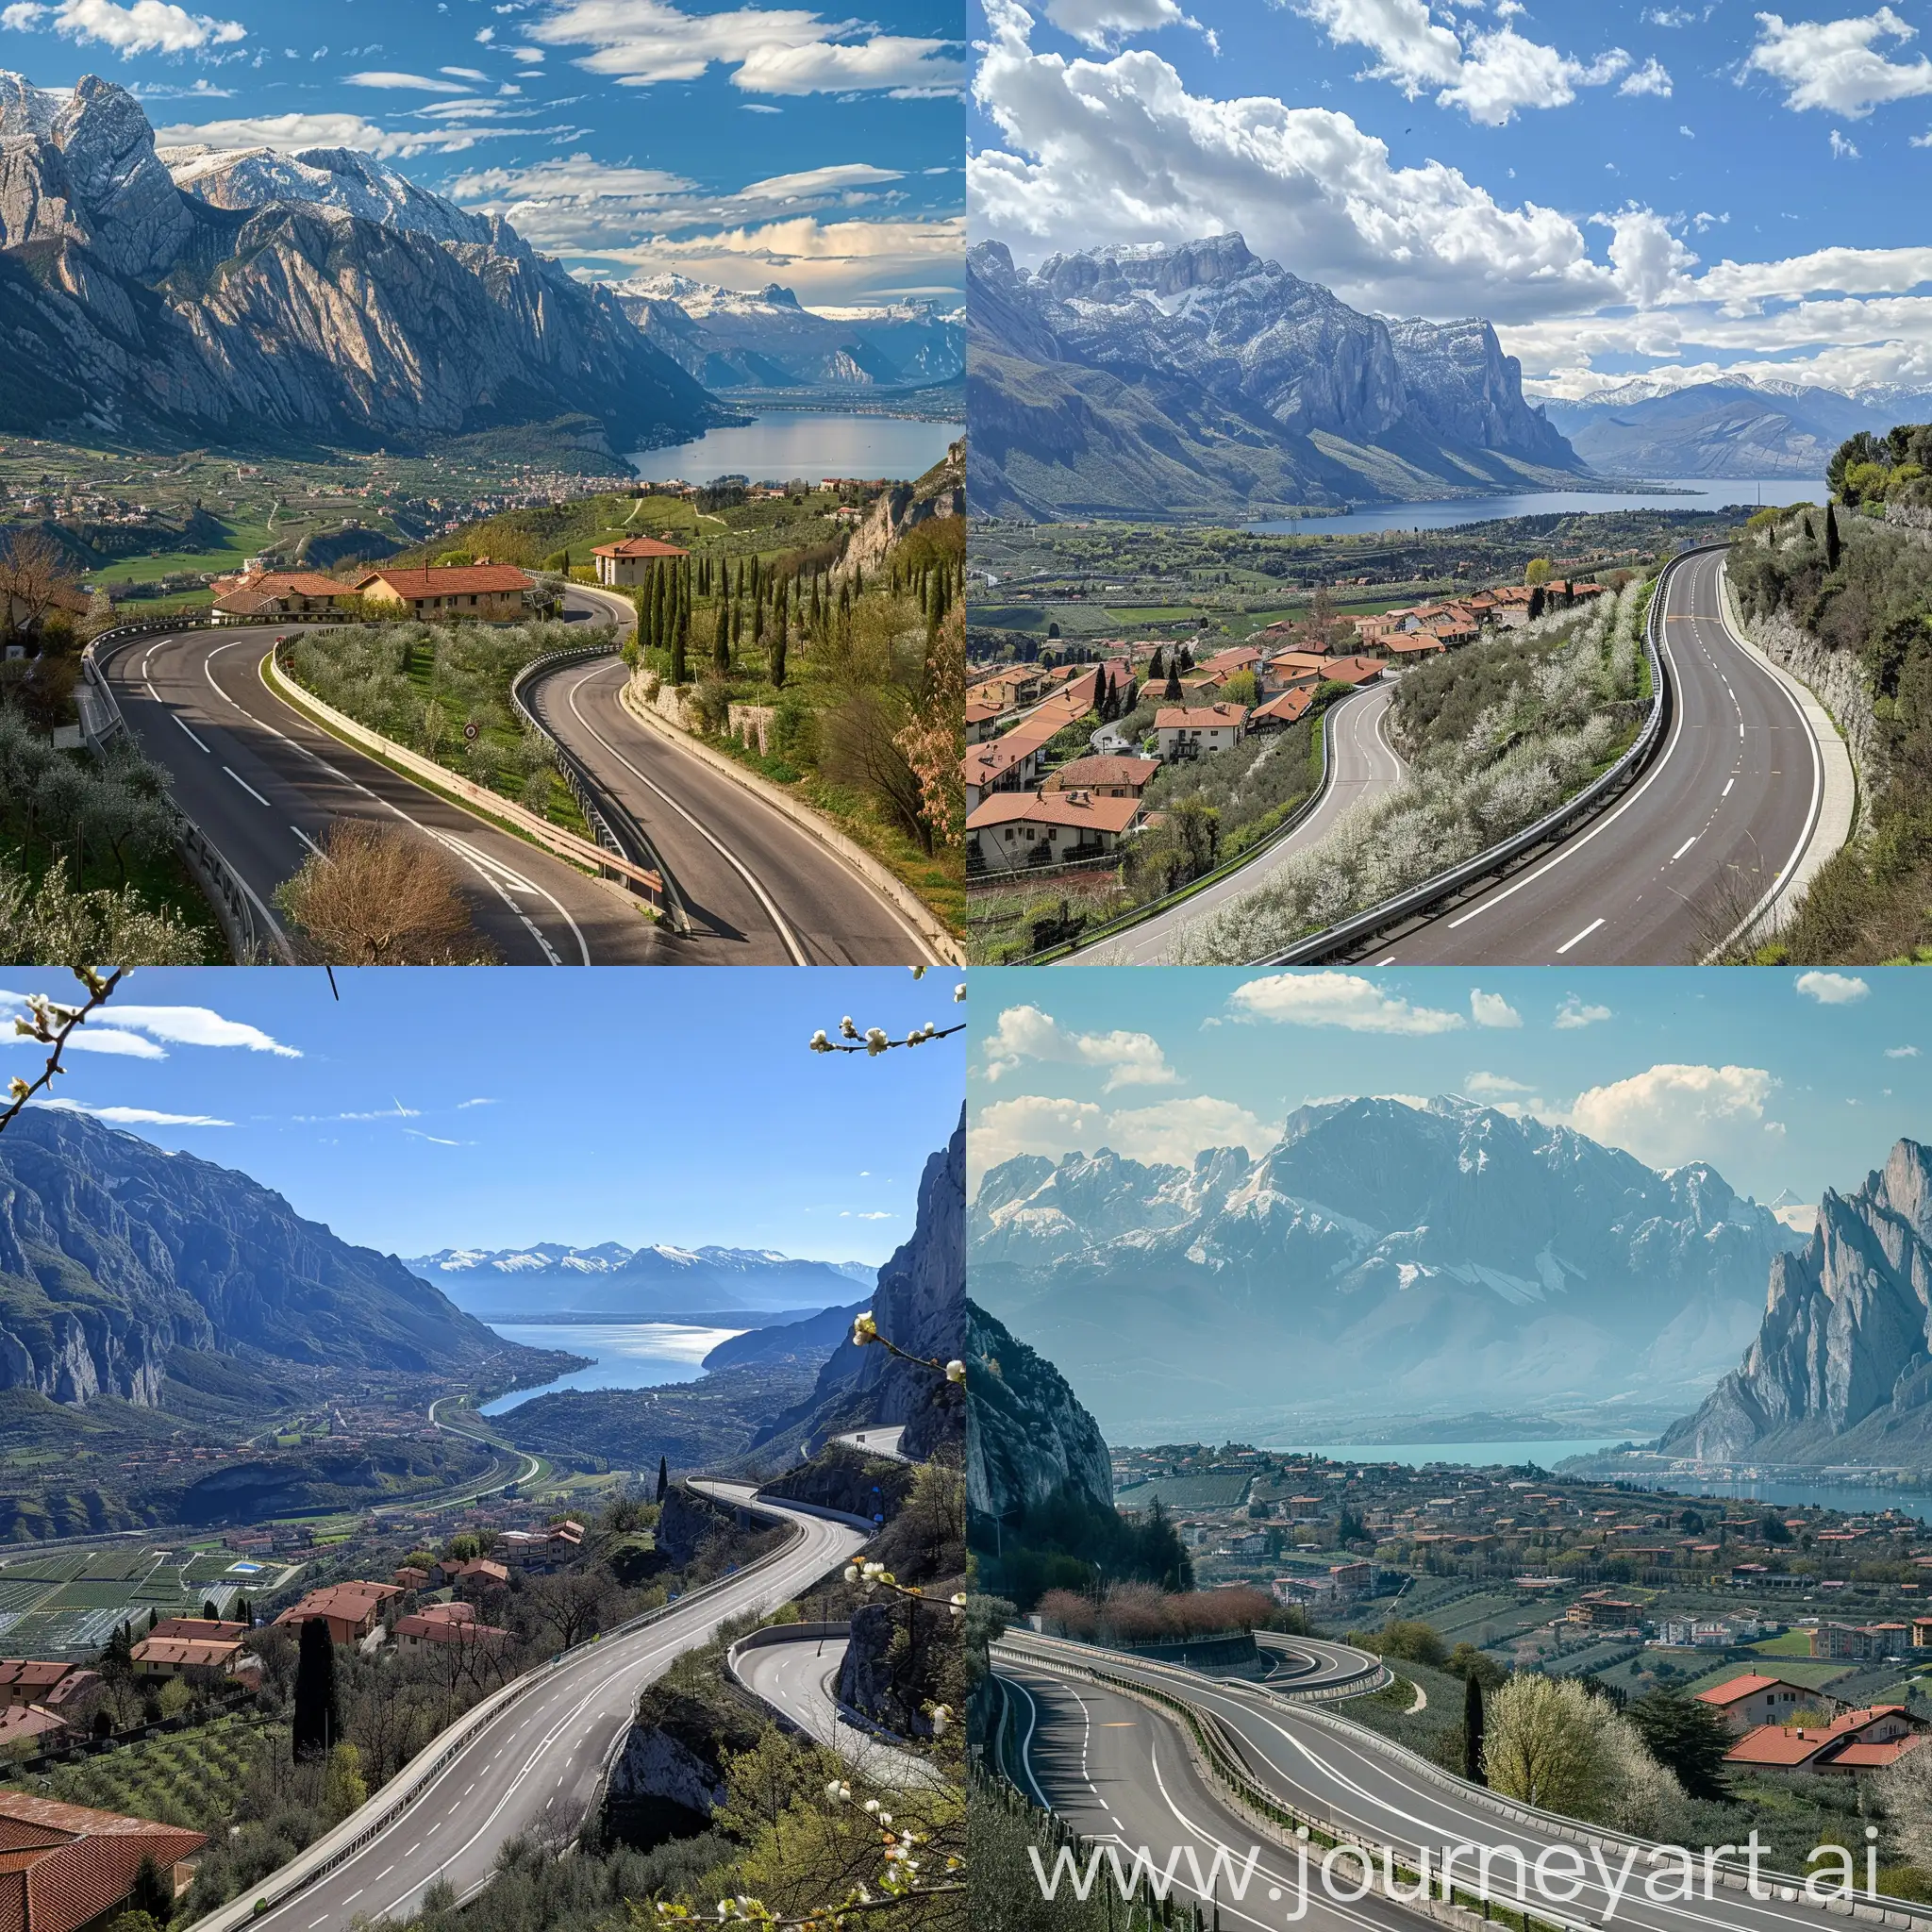  A breathtaking view of the Dolomite Alps in early spring, as seen from a winding highway. The Sarca valley stretches out below, with Riva del Garda town roofs, olive groves and the sparkling waters of Lake Garda in the distance